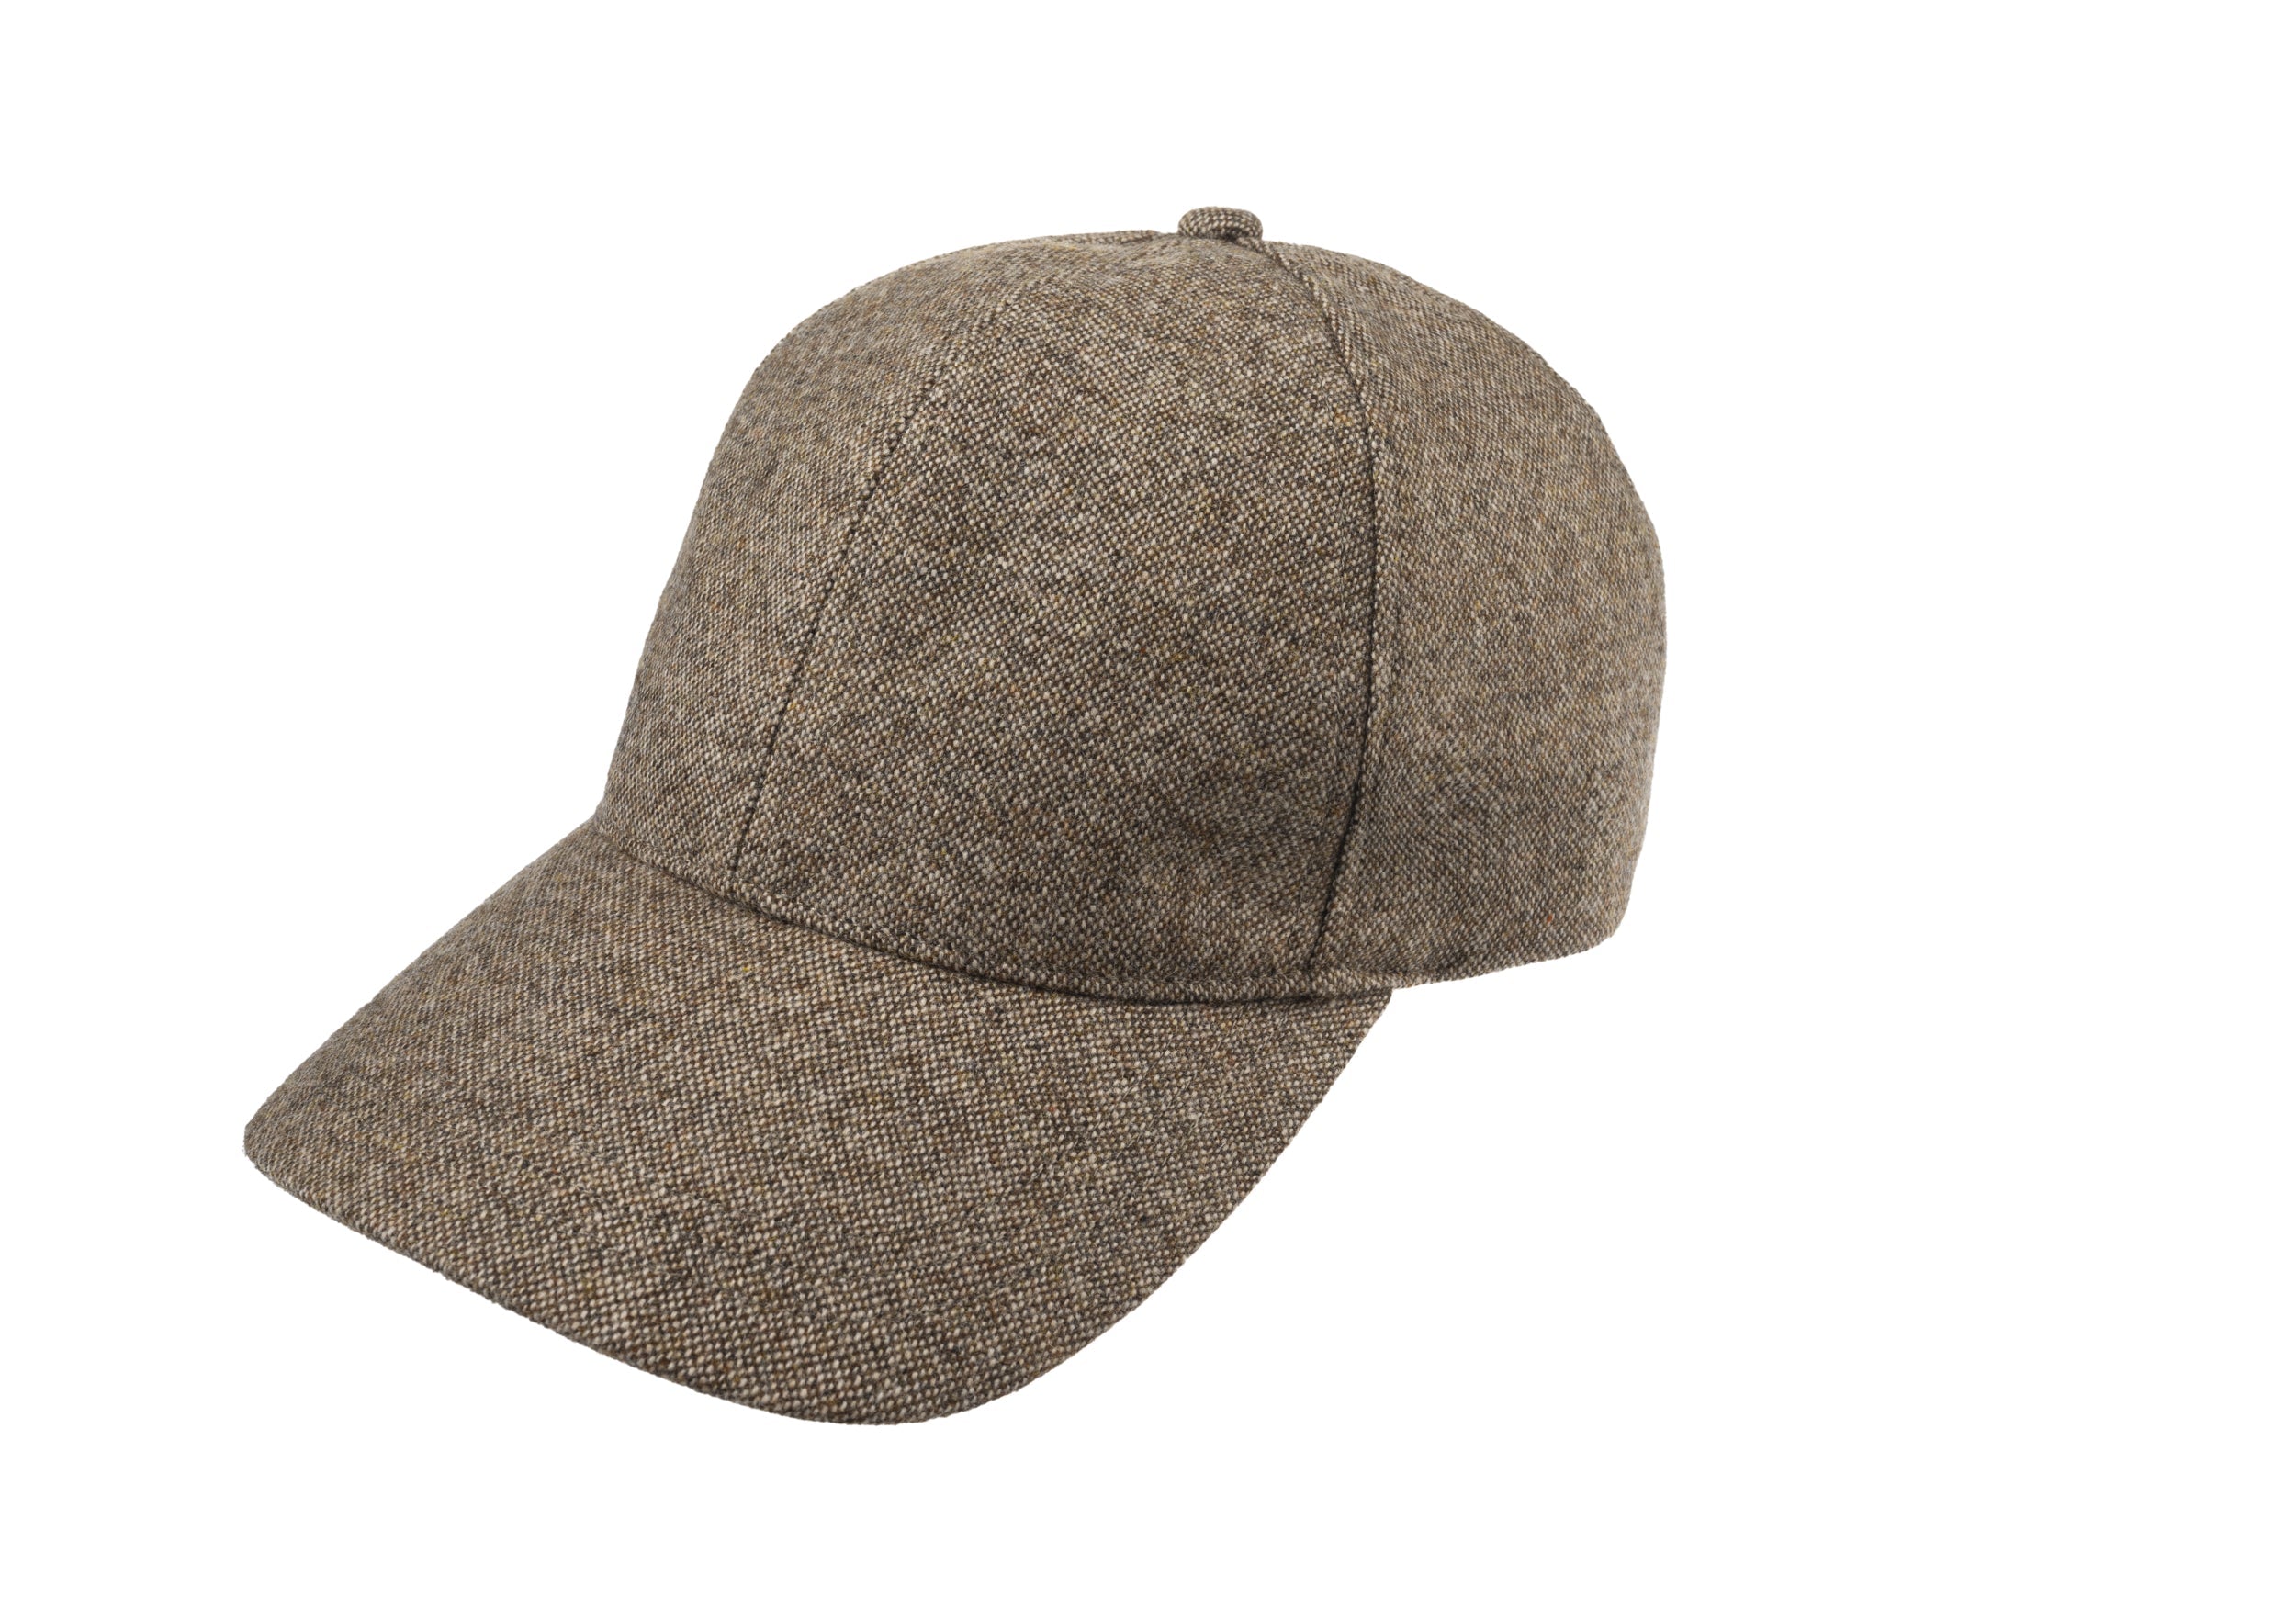 Light Brown Baseball Cap tweed fabric with one size adjuster